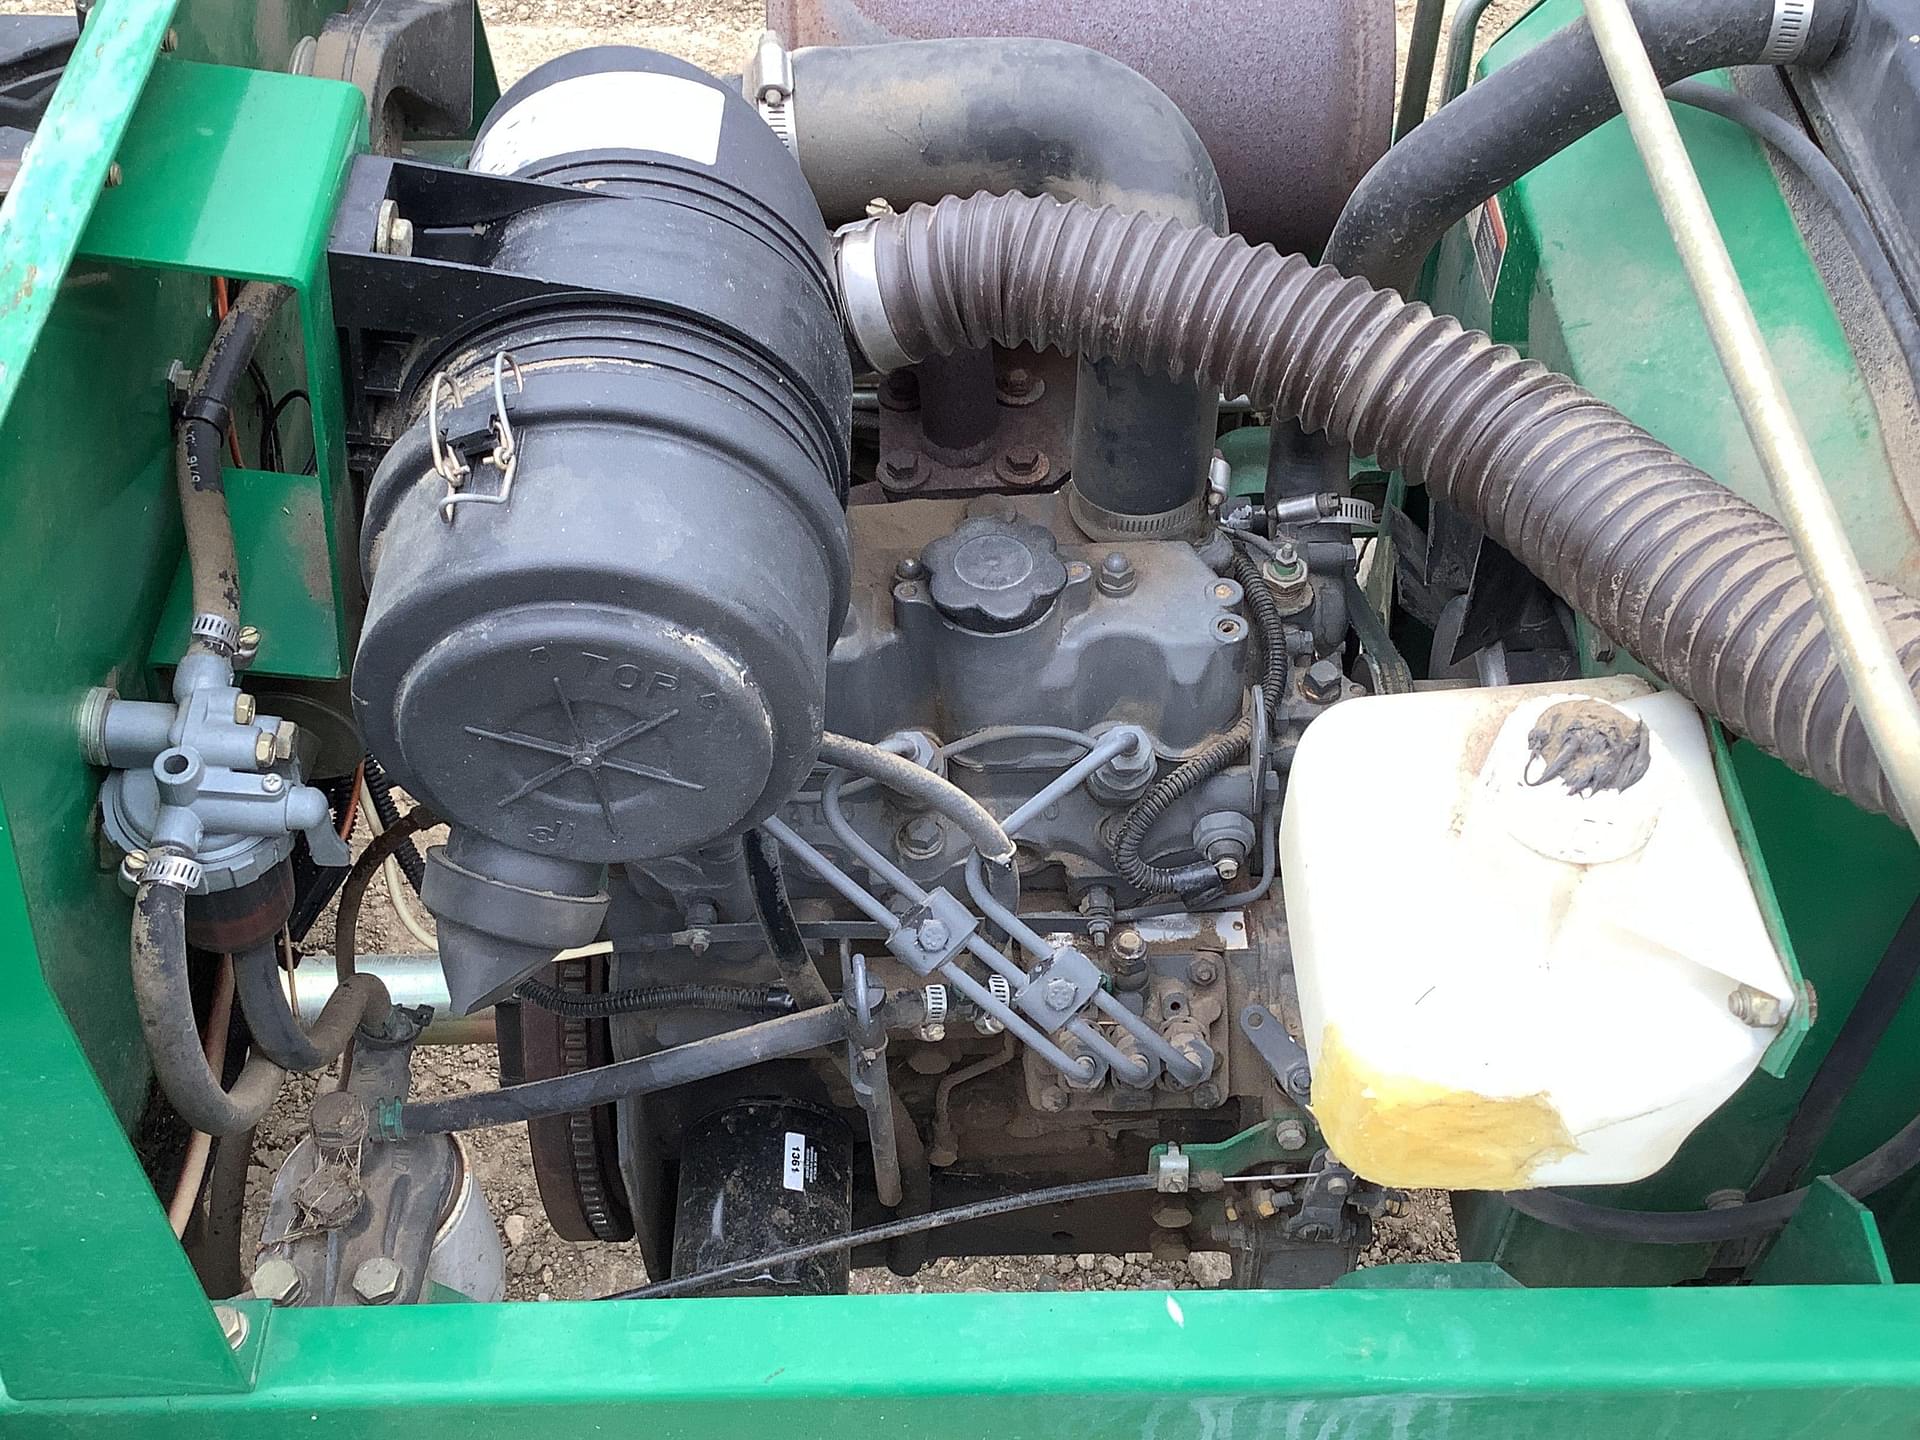 Main image Ransomes 723D 22